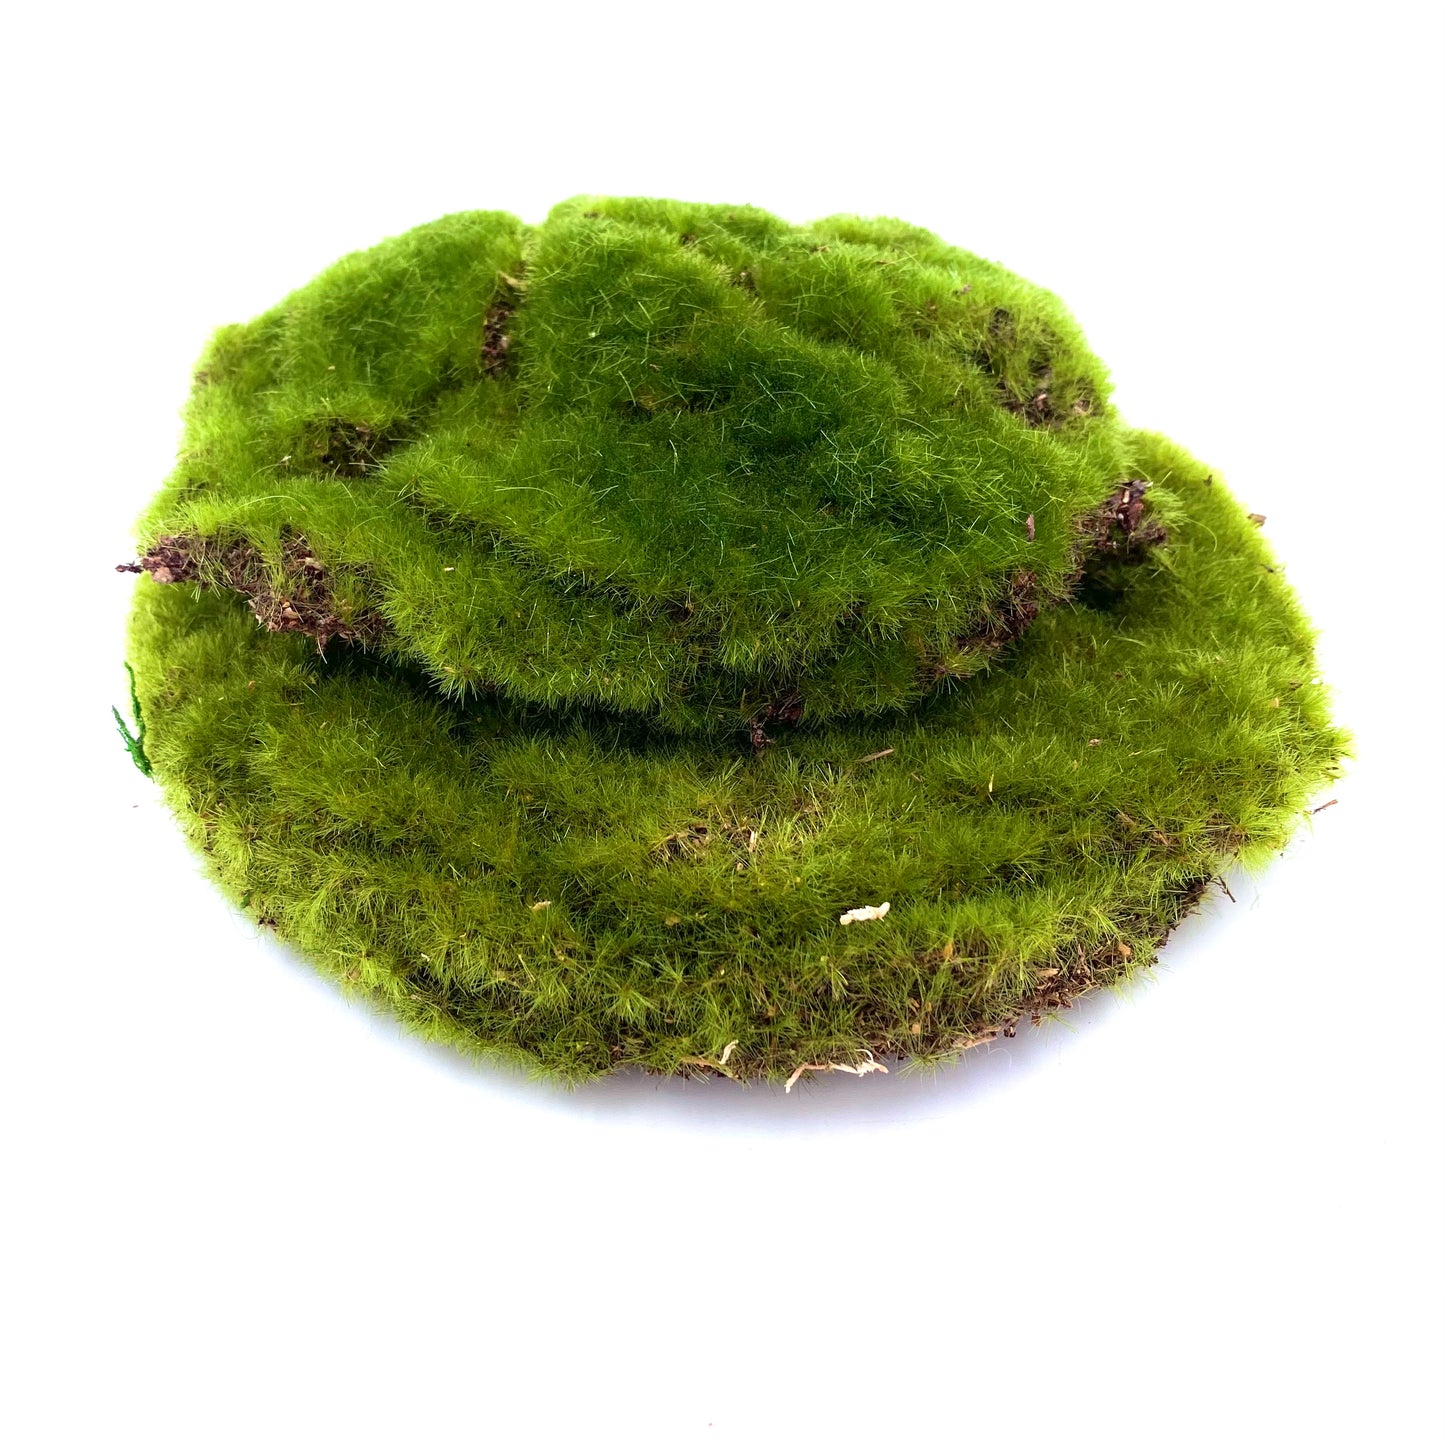 Moss Pack Fairy Garden Product (Forest)